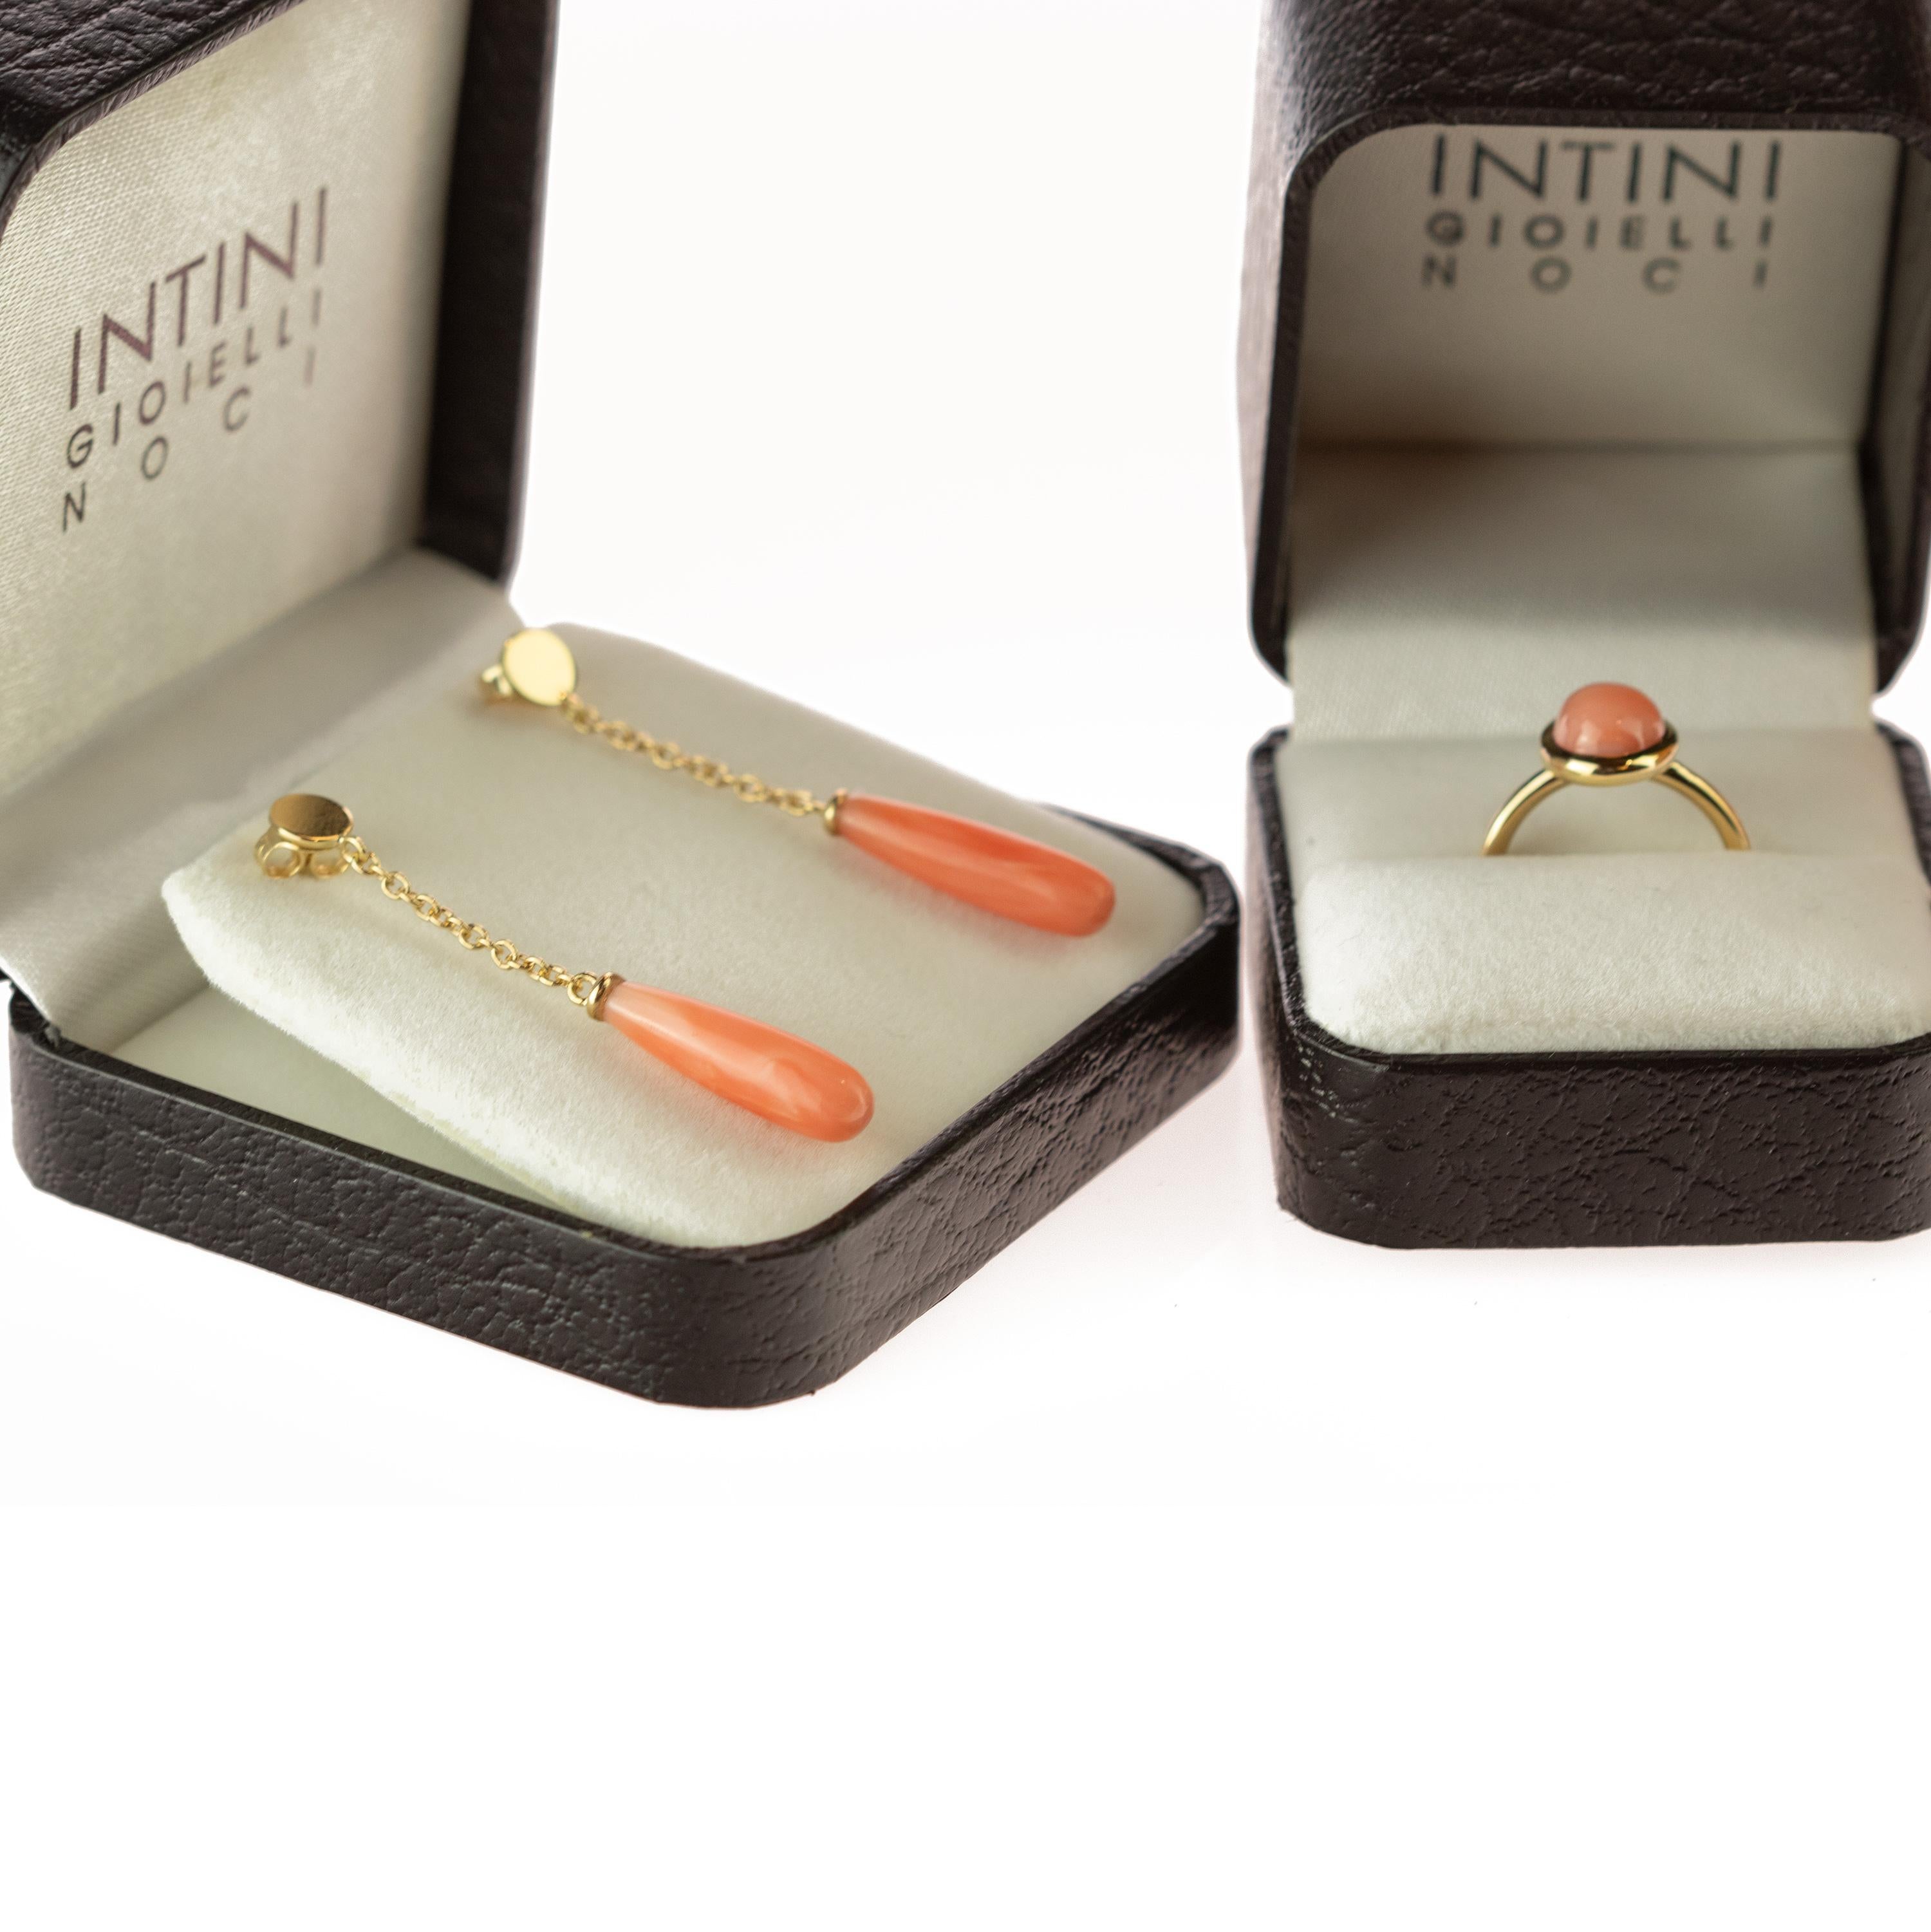 Delight yourself with a luminous handmade jewelry pink Japanese coral earrings and ring set. A modern and artisan round coral cabochon ring in 18 karat yellow gold accompanied a stunning and splendid drop dangle earrings. The pieces start in a